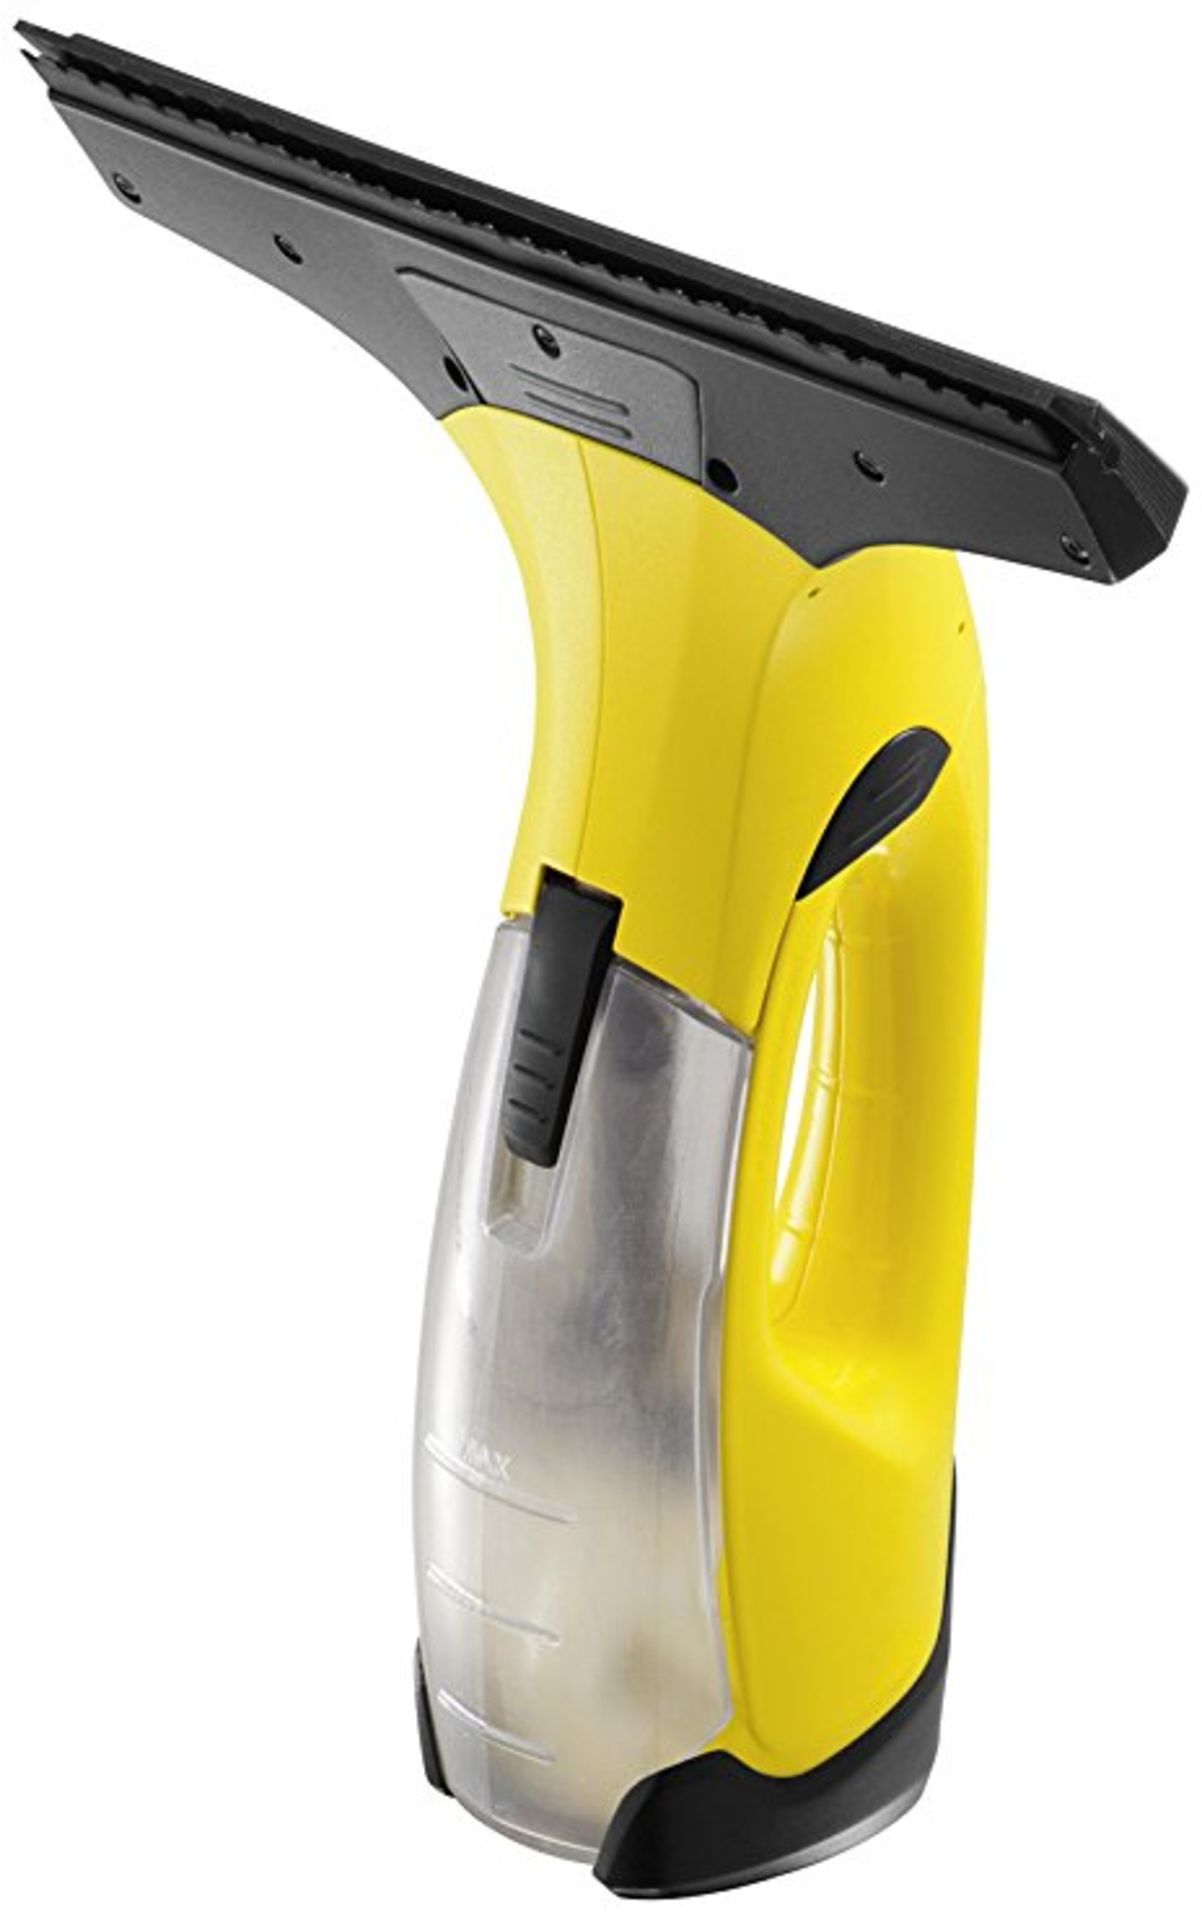 V Brand New Karcher WV2 Window Vacuum Cleaner - £54.98 at GardenLines.co.uk - Cleans Up To 60 - Image 2 of 2